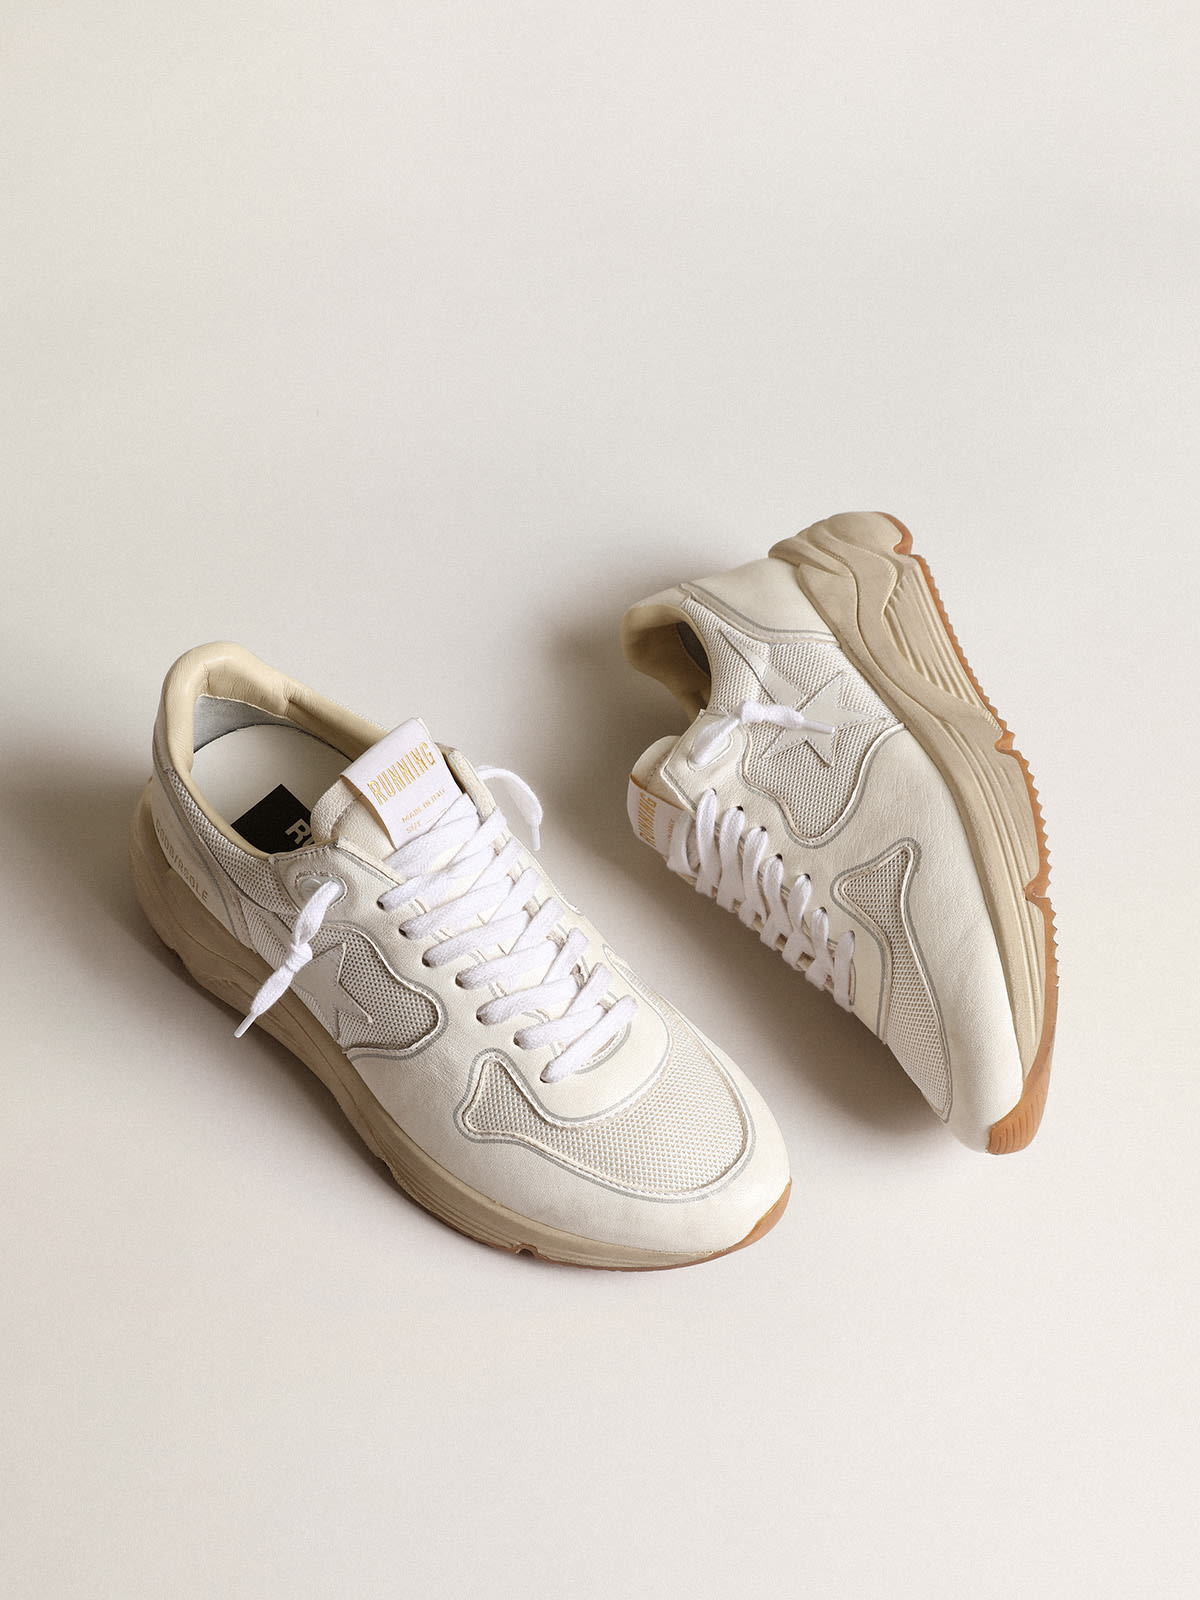 Golden Goose - Women's Running Sole in mesh and white nappa in 